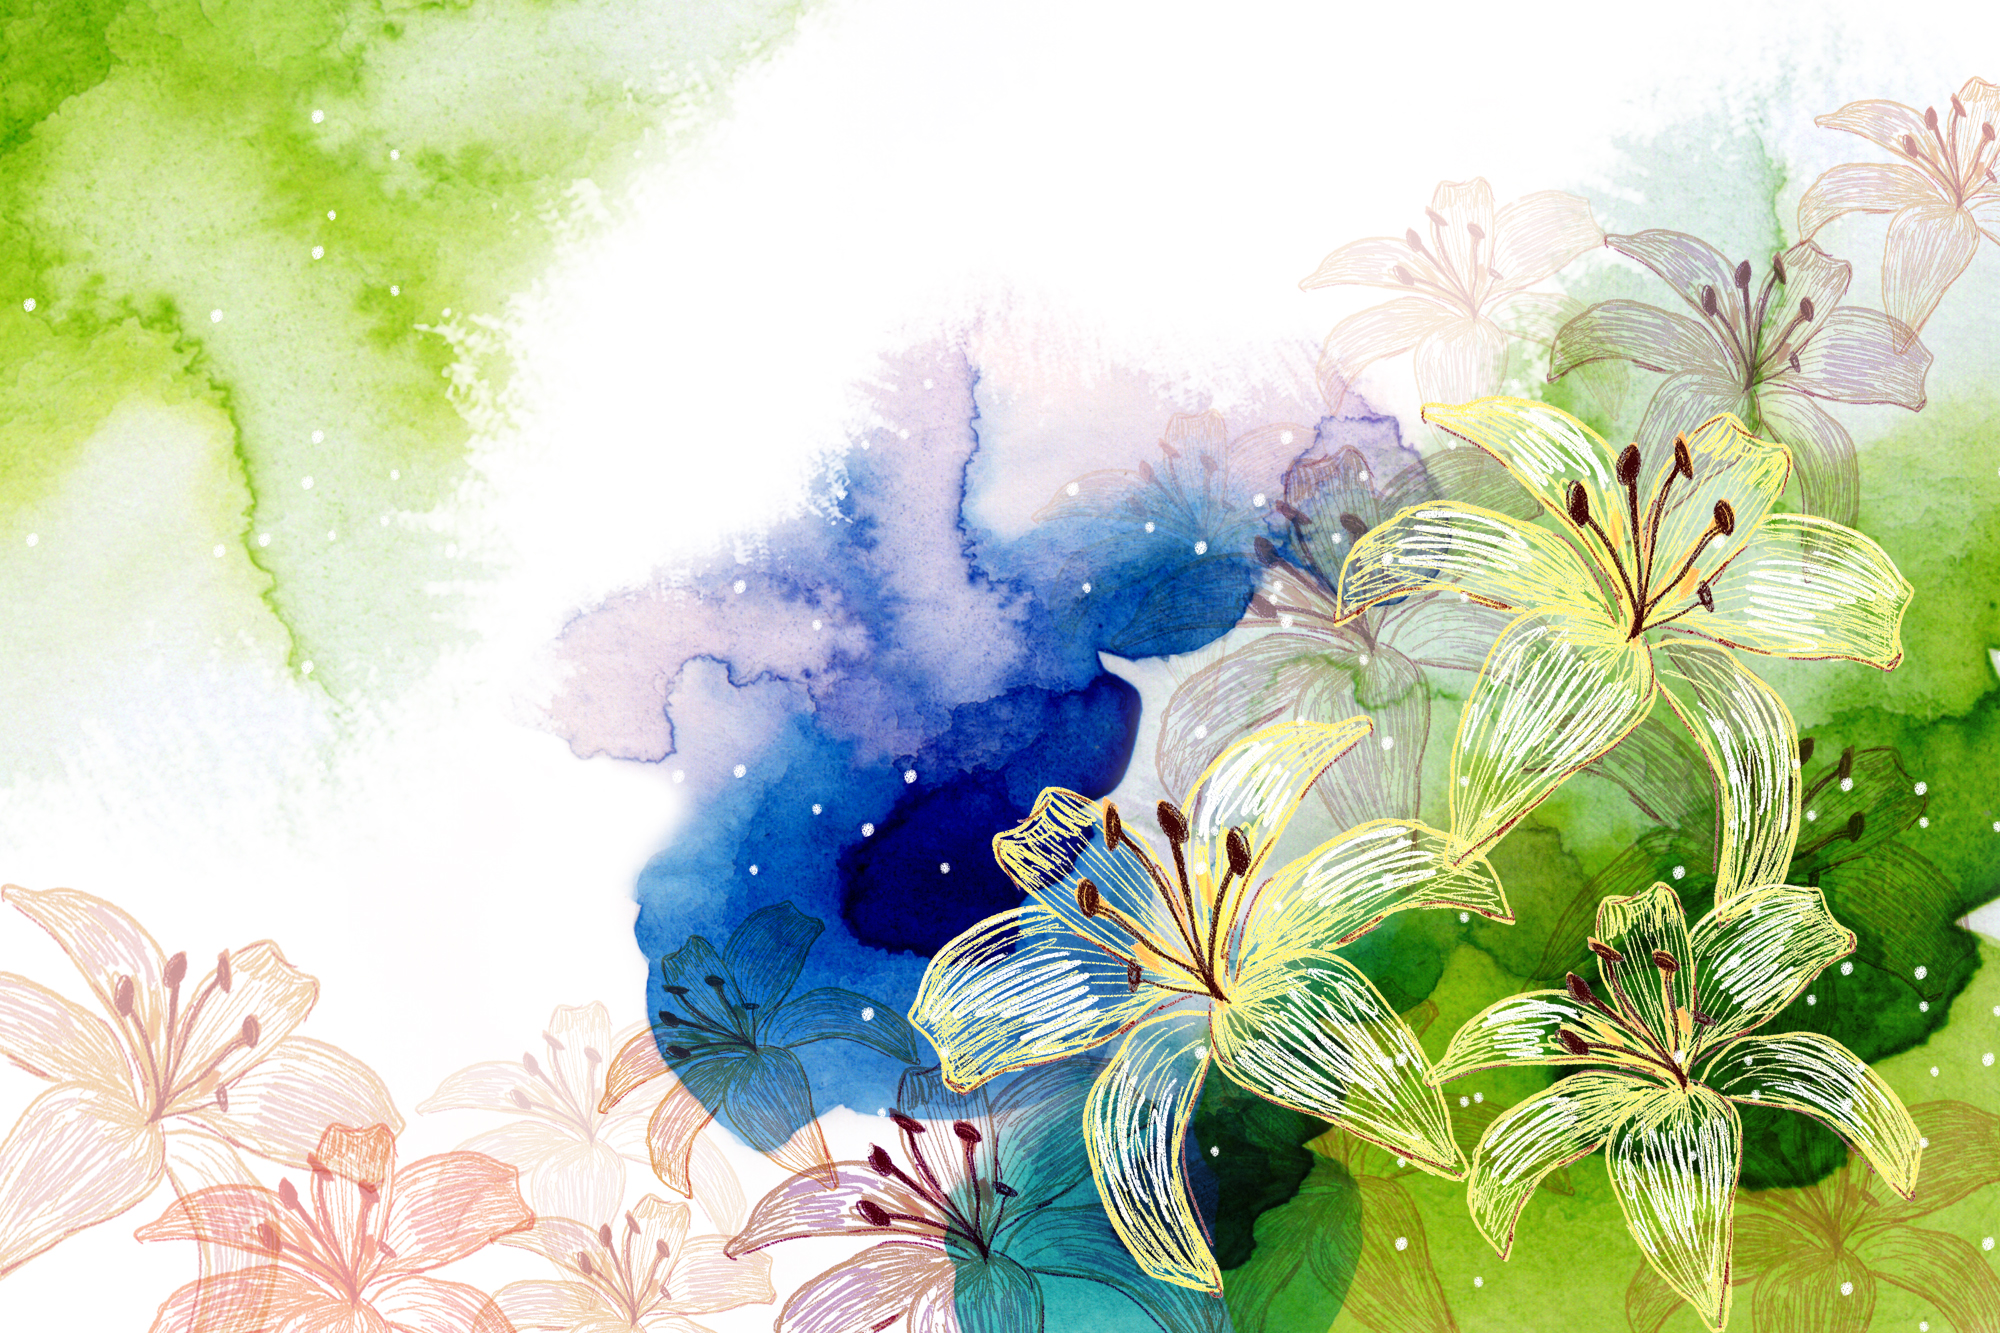 15 Free PSD Watercolor Backgrounds for Artistic Designs